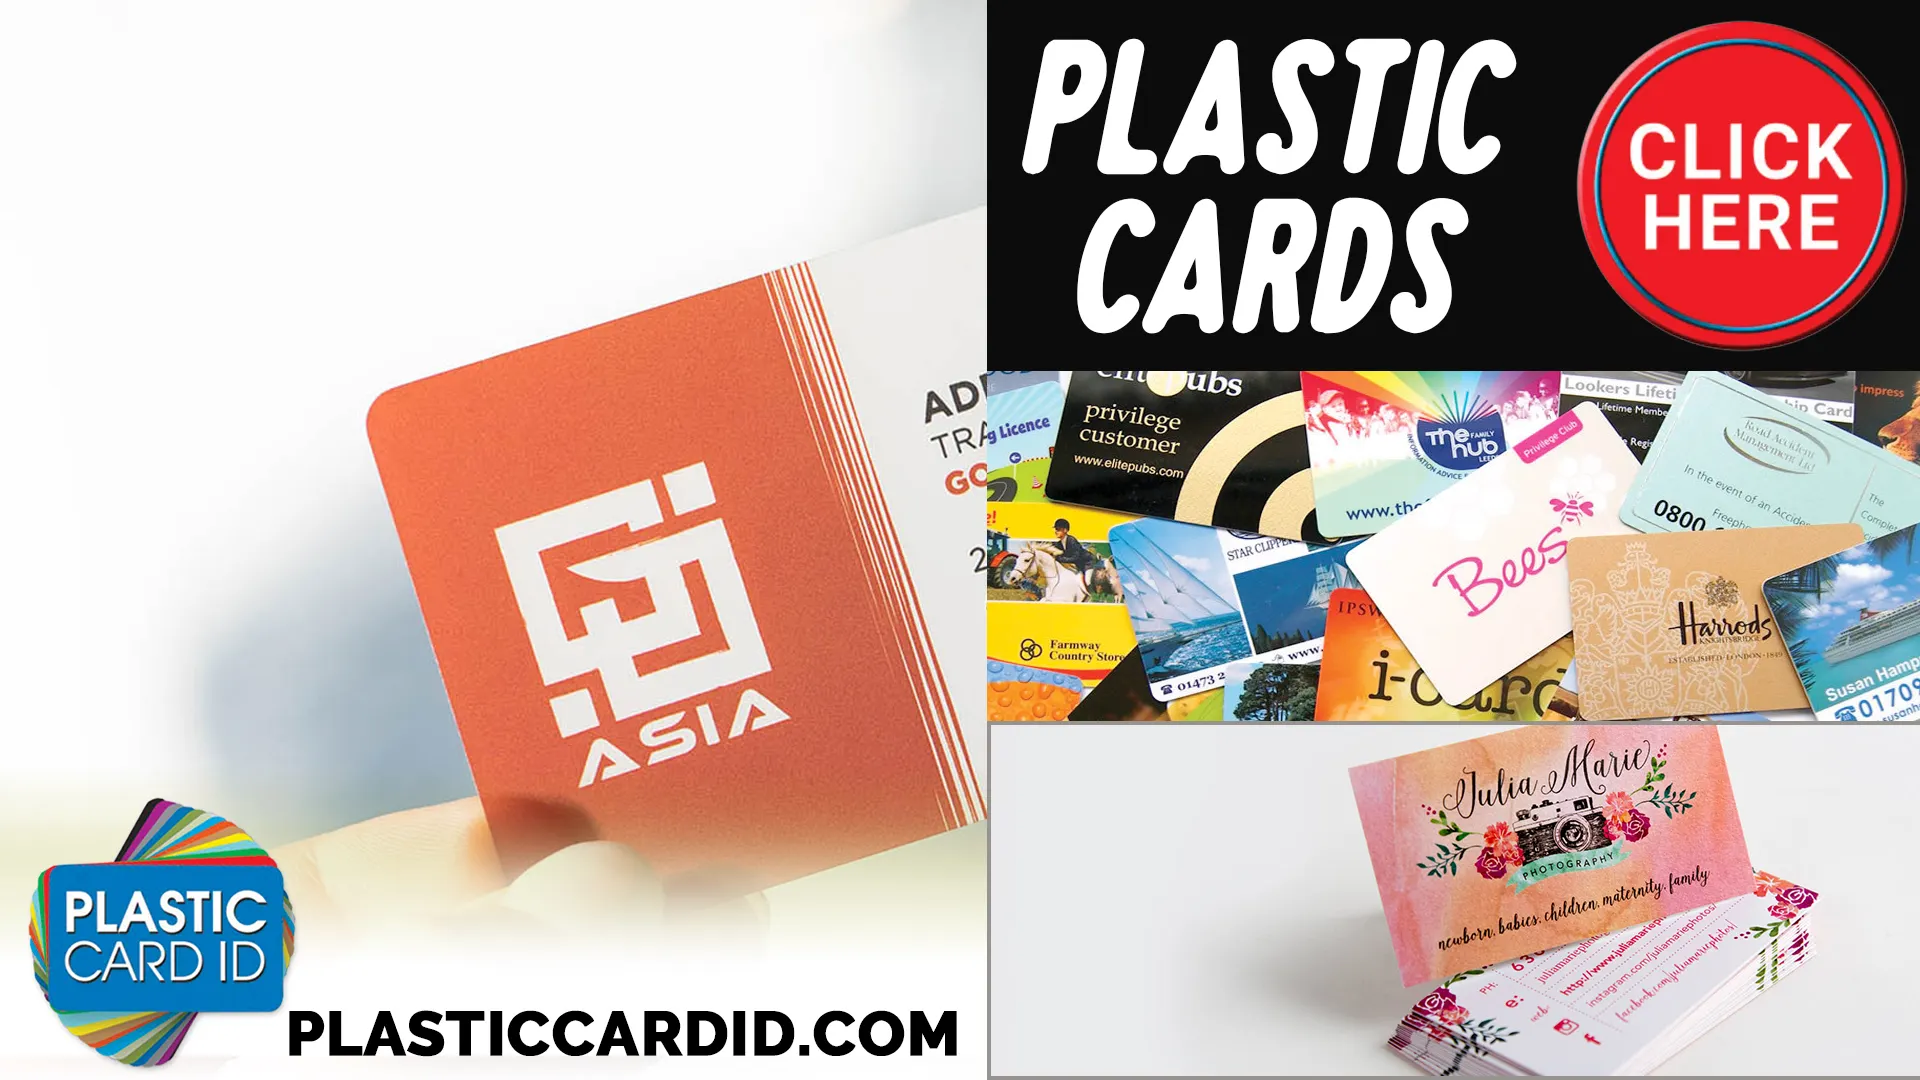 Keeping Up With Card Trends: The Latest in Plastic Card Technology